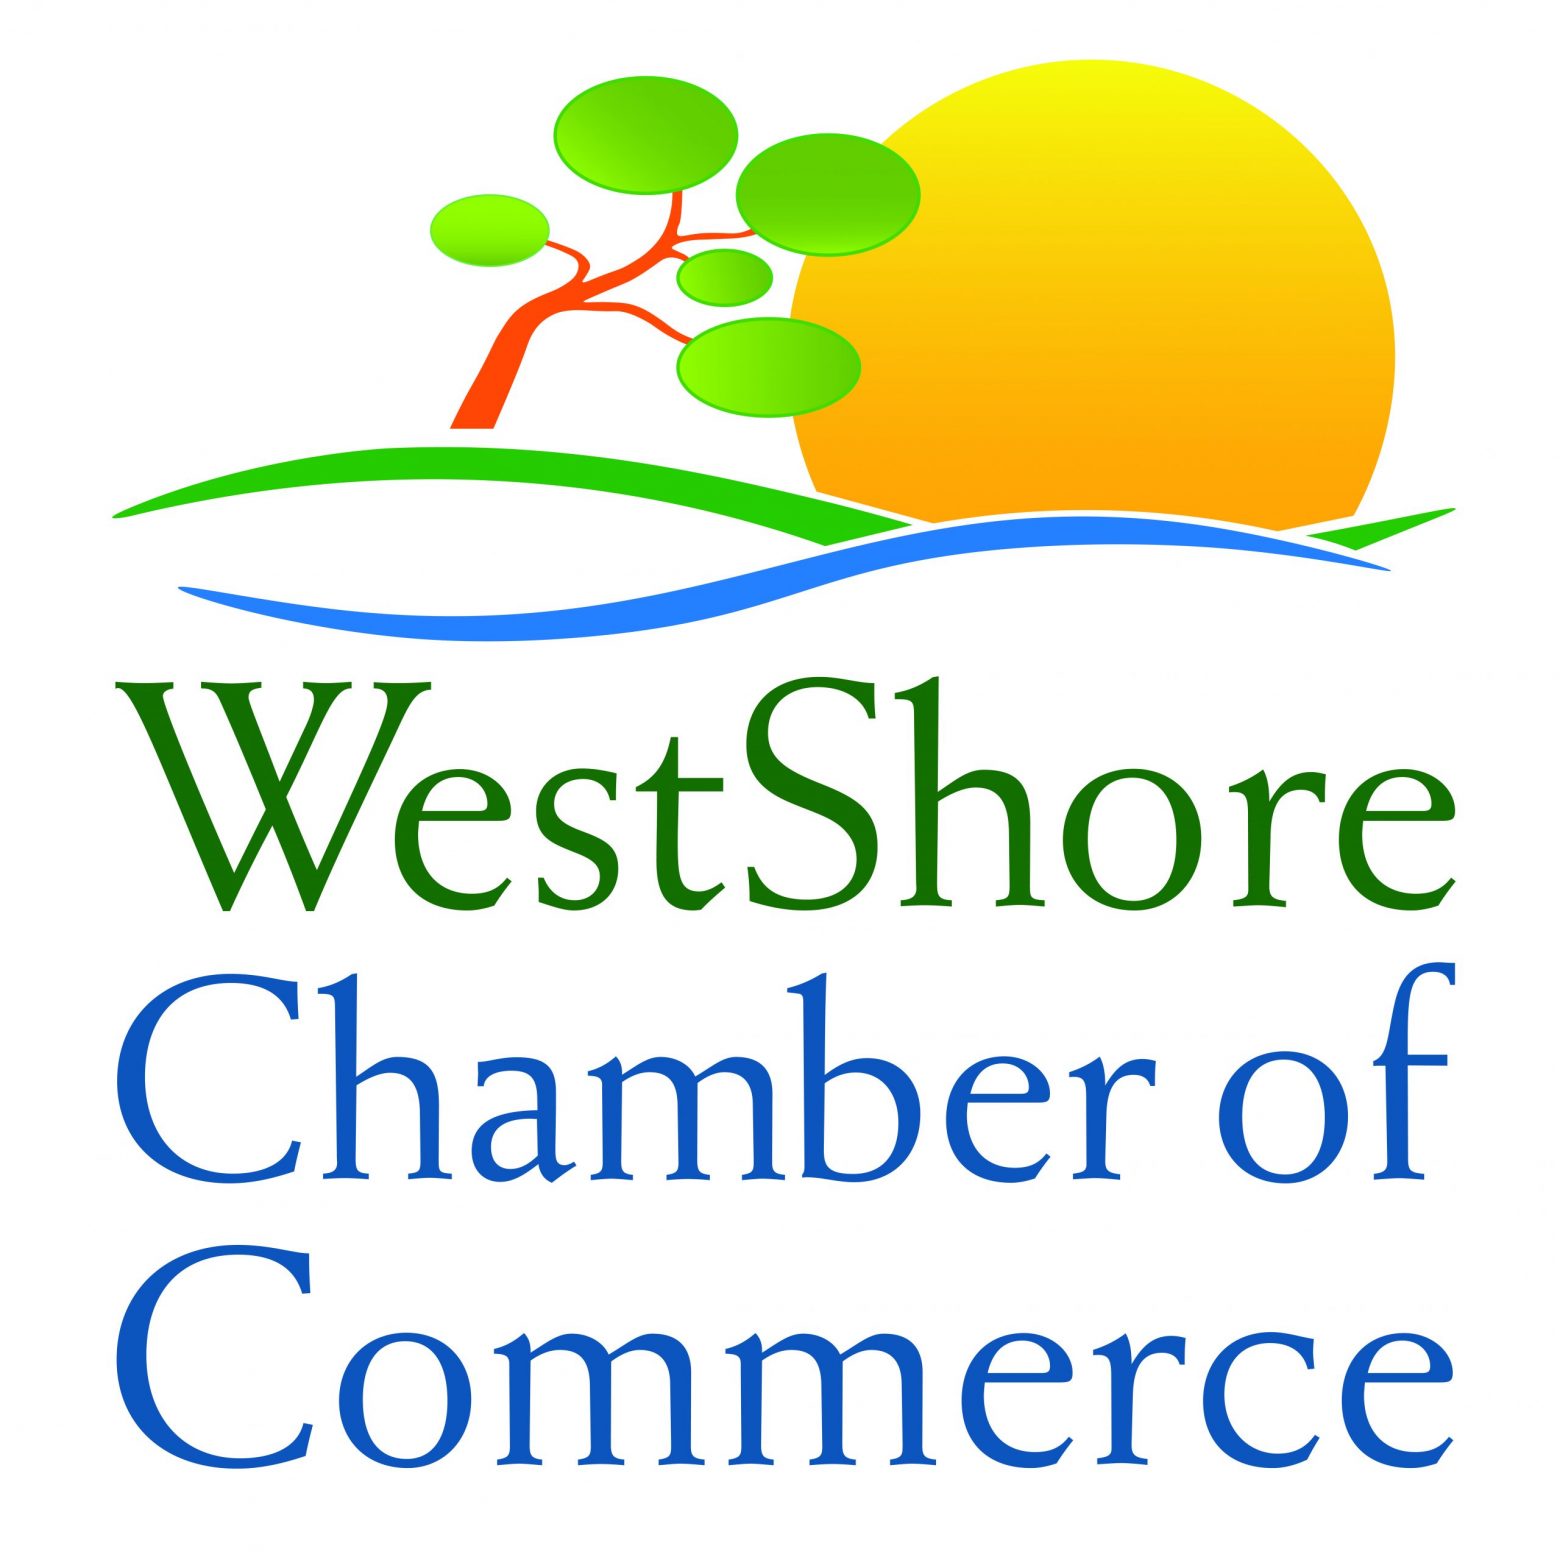 WestShore Chamber of Commerce